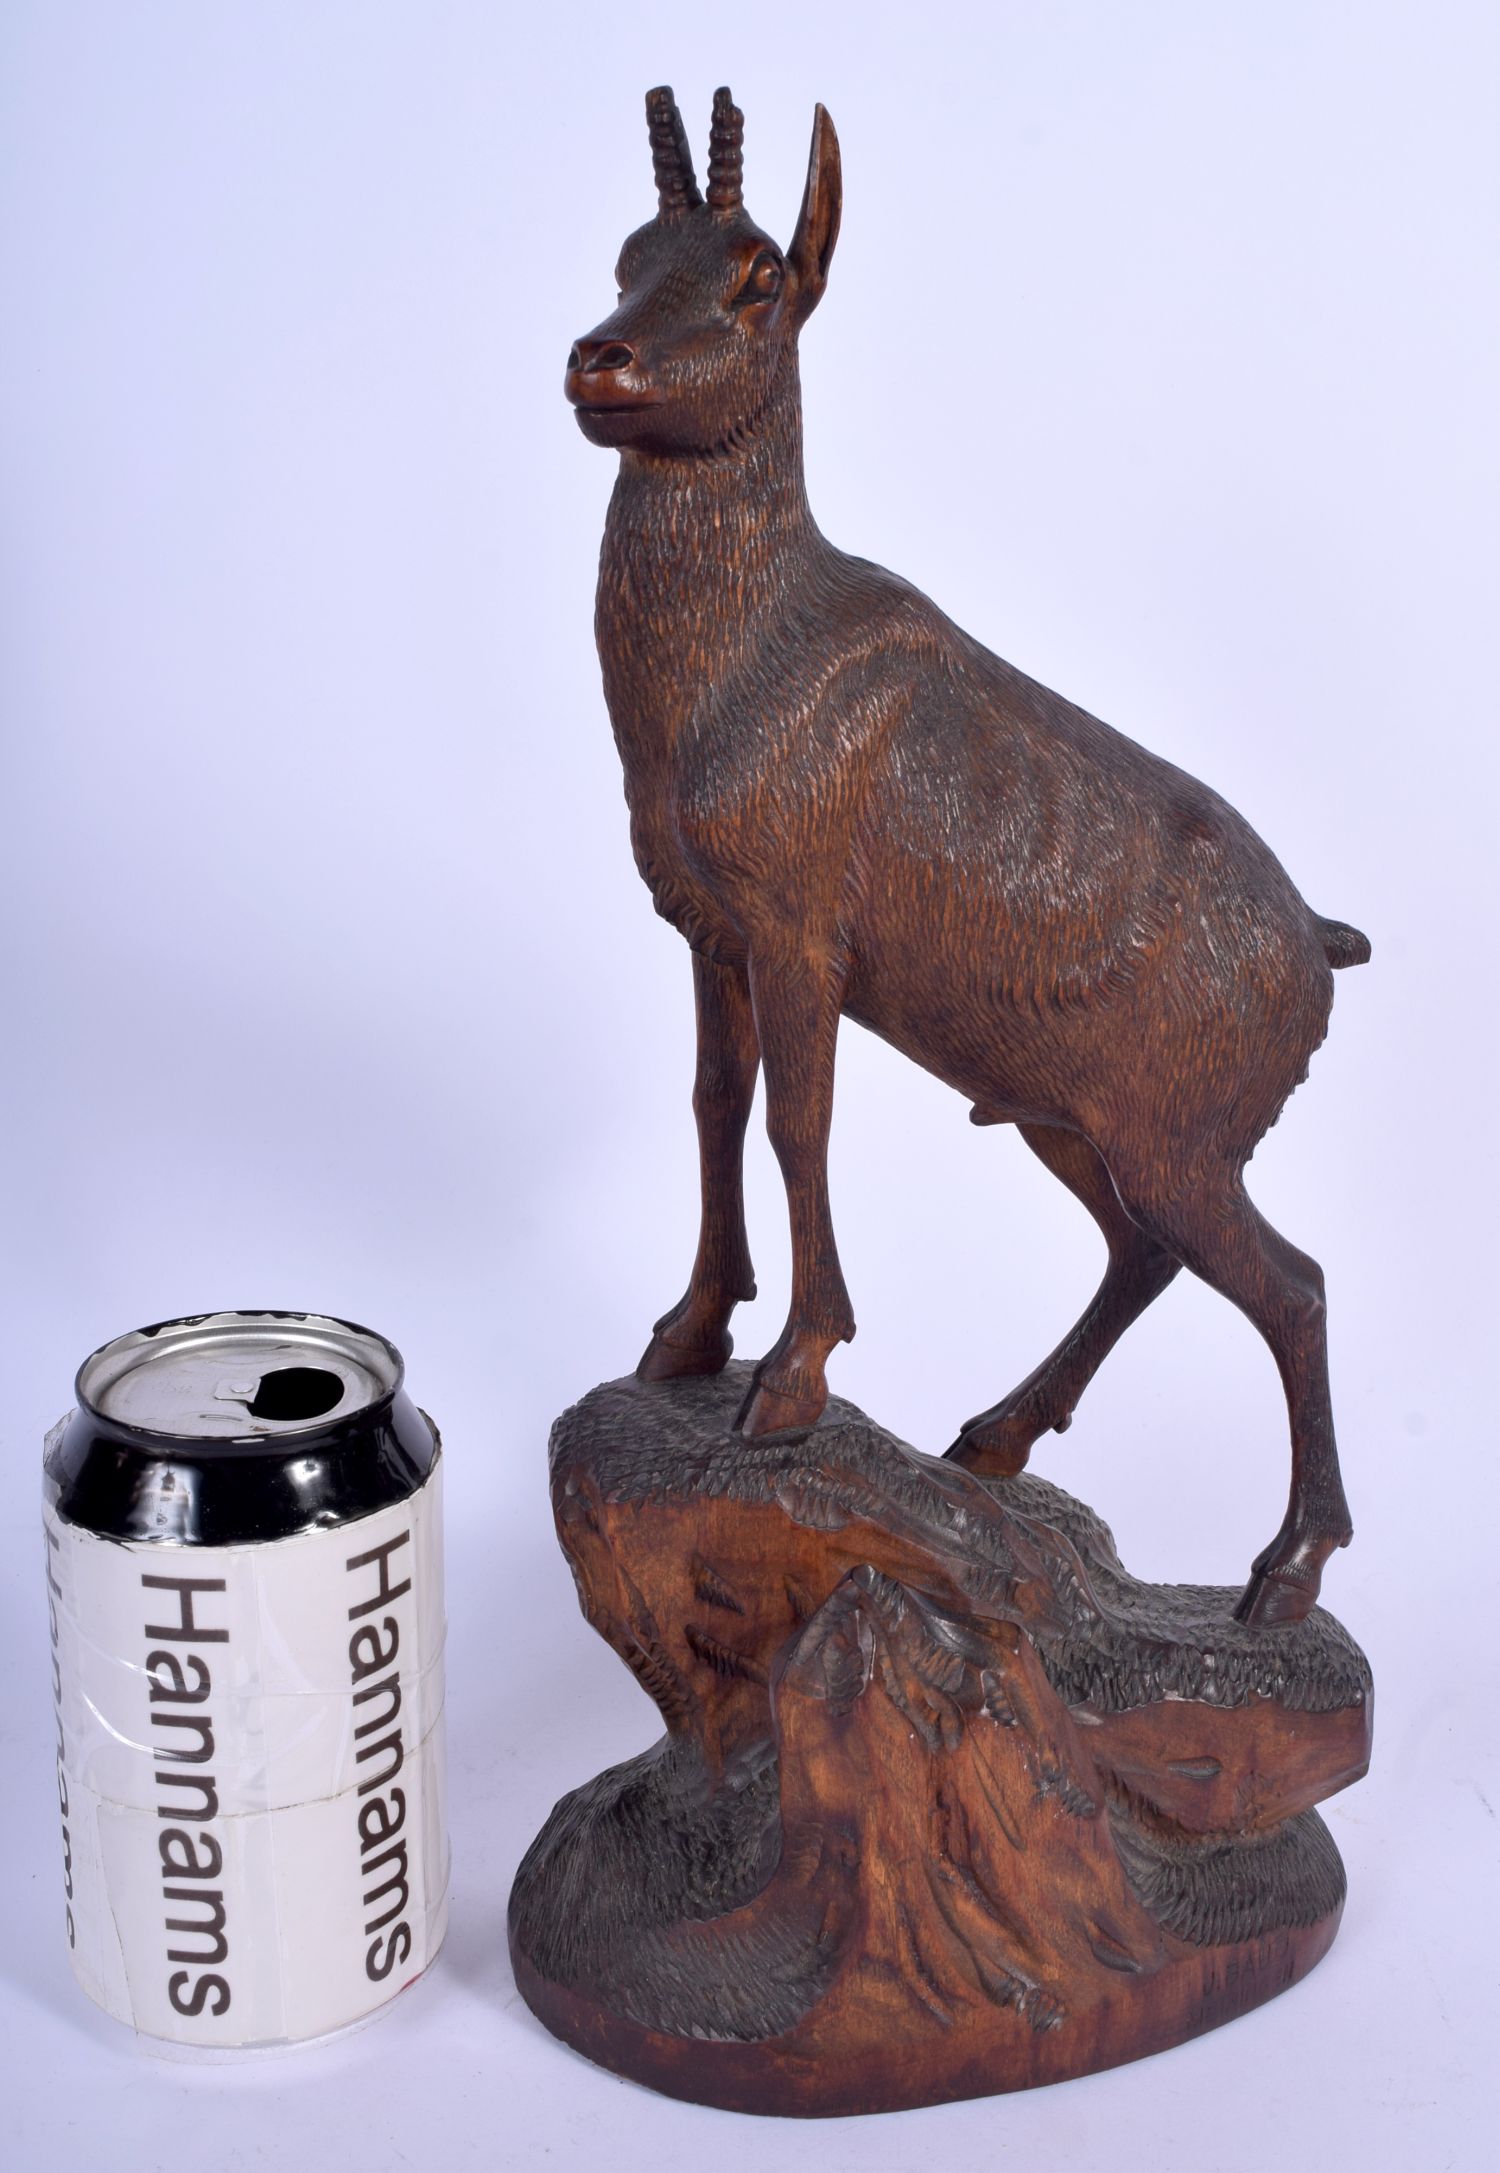 A 19TH CENTURY BAVARIAN BLACK FOREST FIGURE OF A MOUNTAIN GOAT by J Baud, modelled upon a naturalist